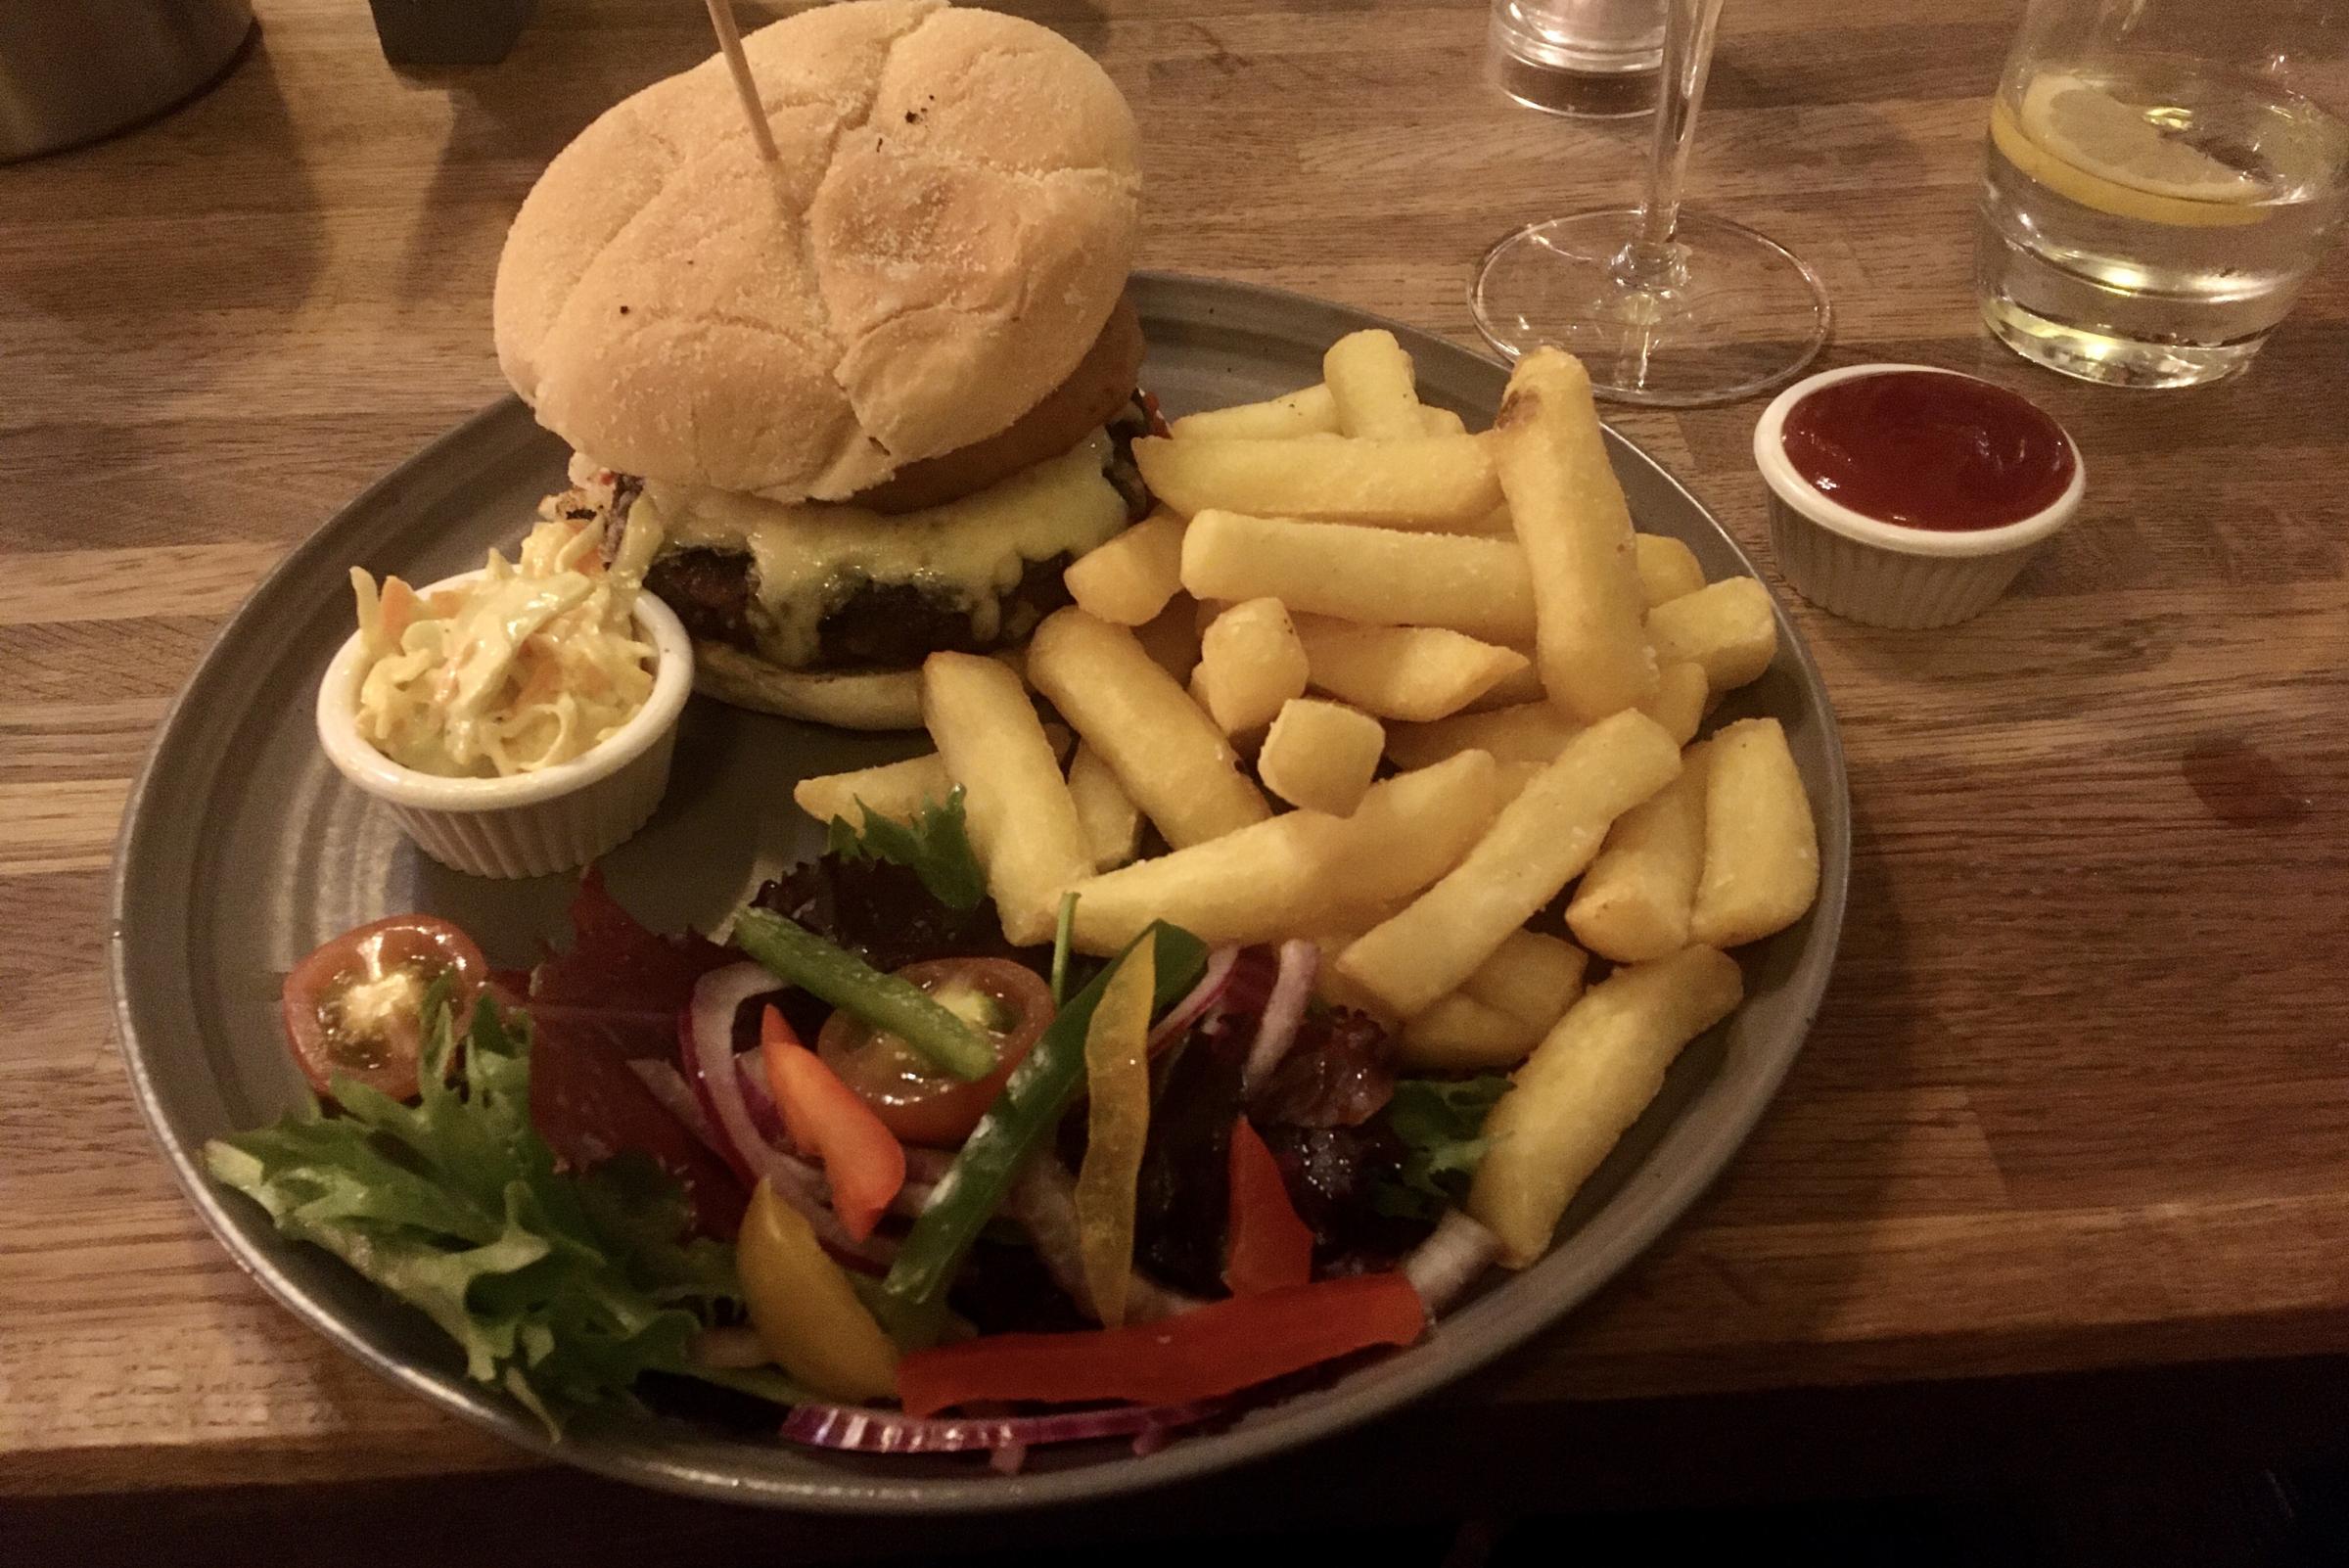 EATING OUT REVIEW: Wildes Wine Bar, York